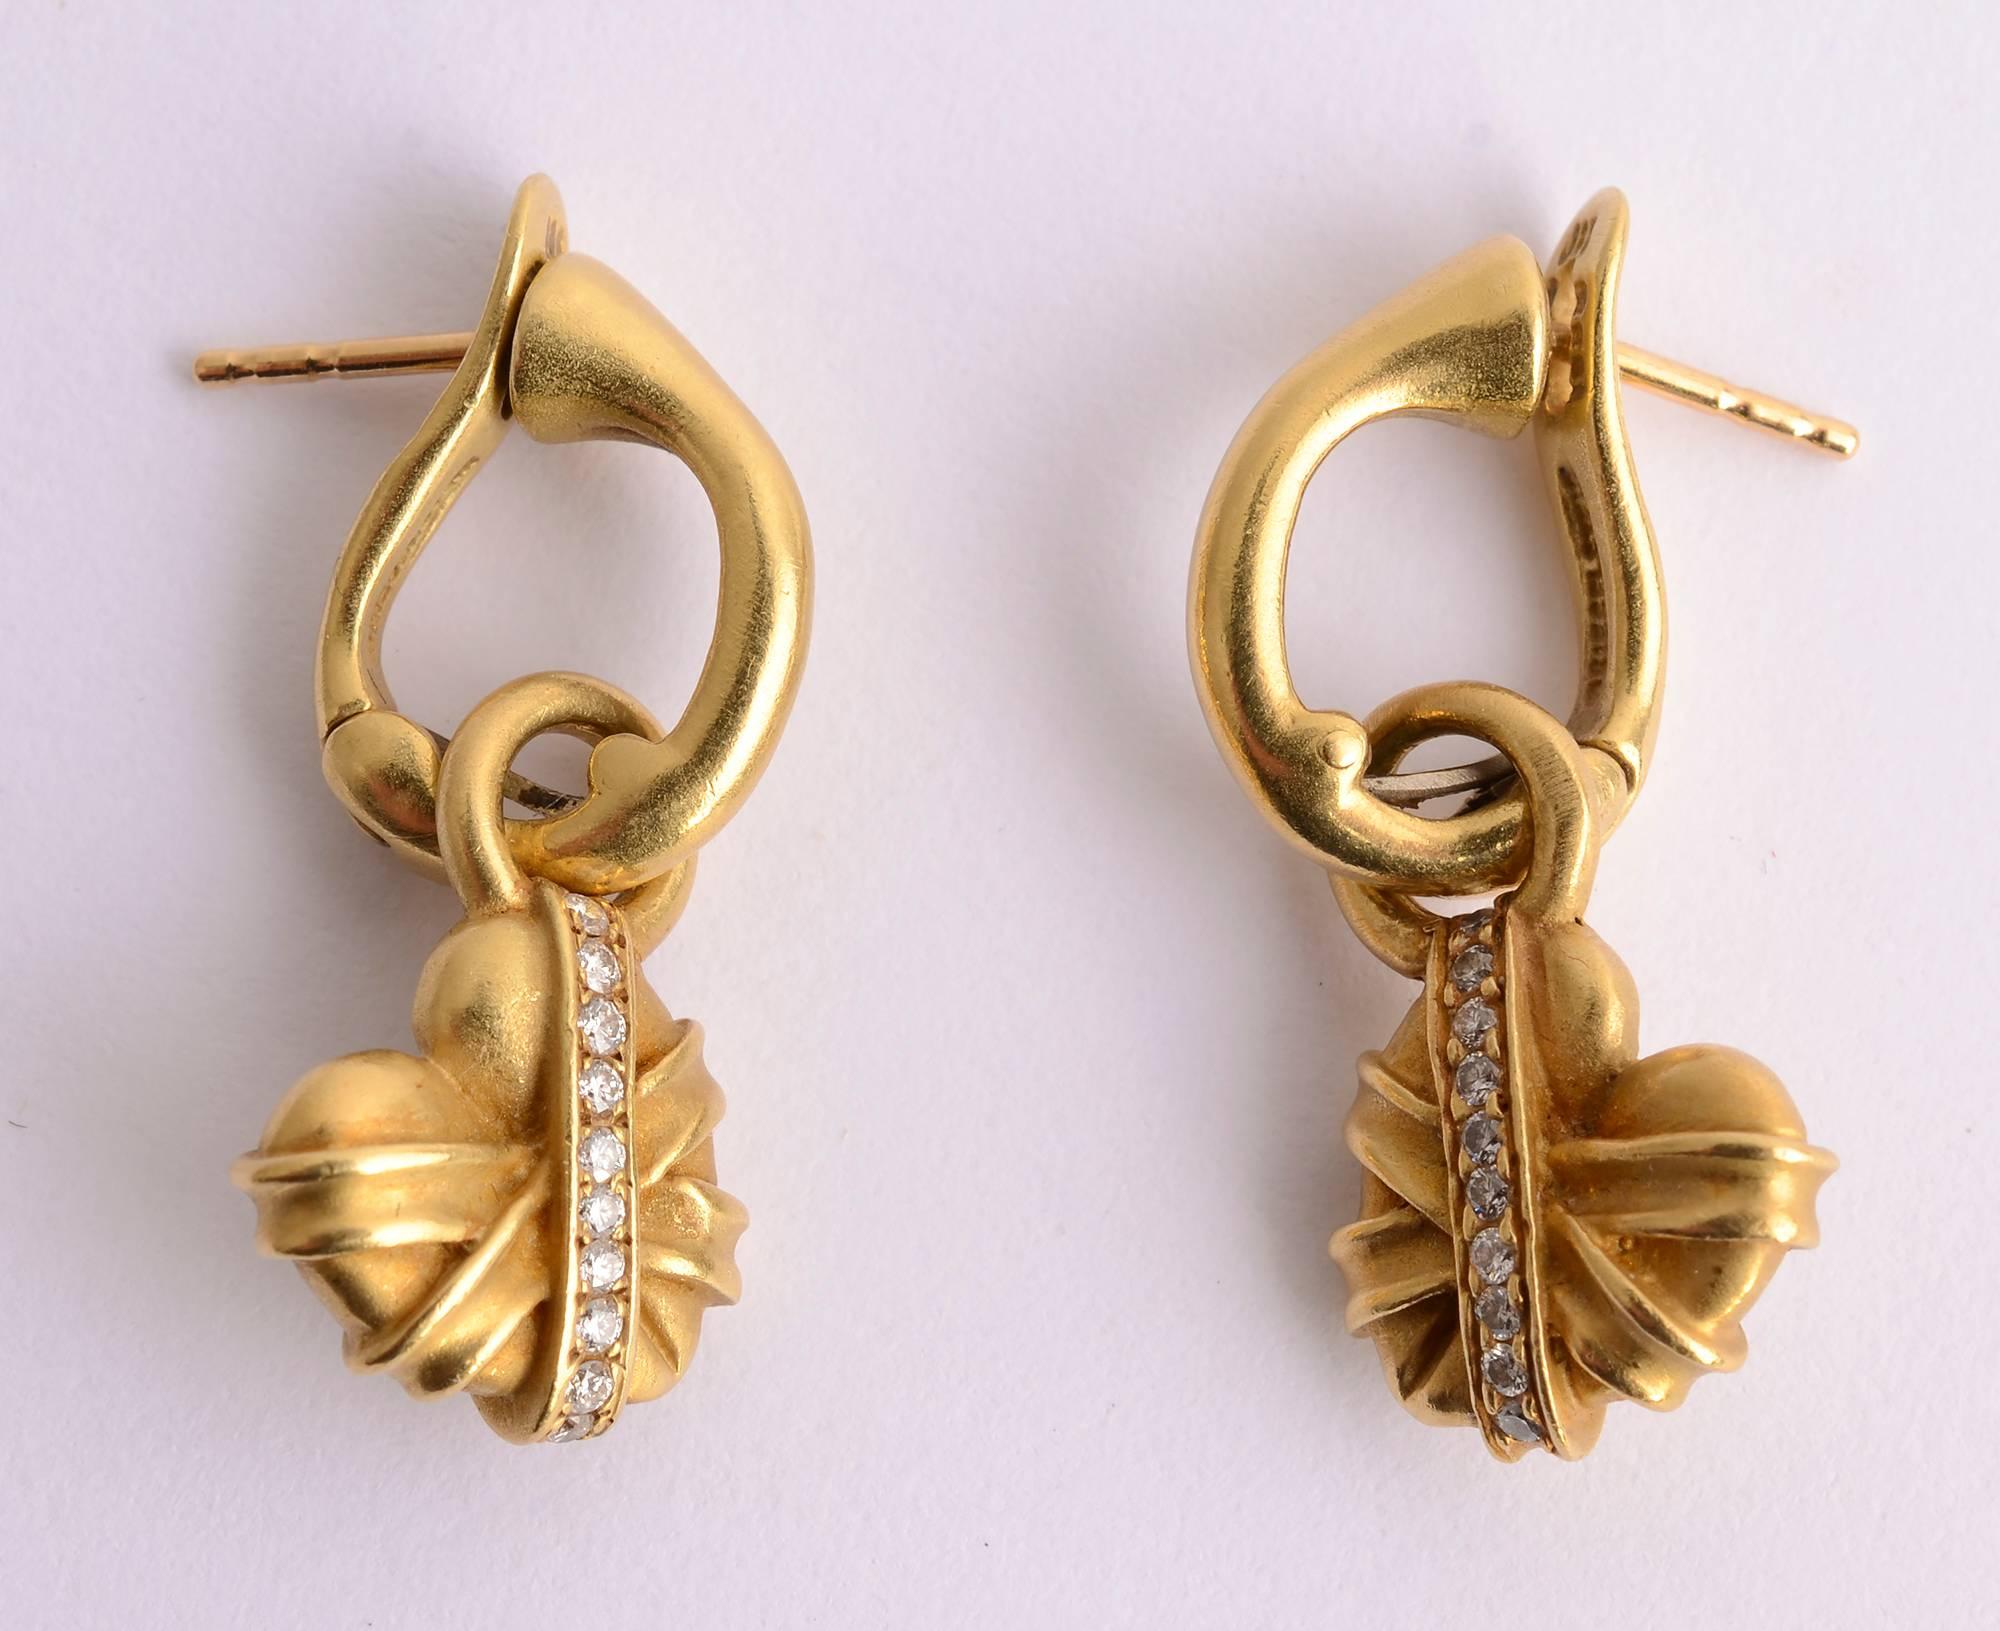 Versatile earrings by Barry Kieselstein Cord. They can be worn with a dangling heart wrapped in diamonds or with the heart removed as a small hoop. With the heart, they measure 1  1/8 inches in length. The hoop alone is half an inch in length. The